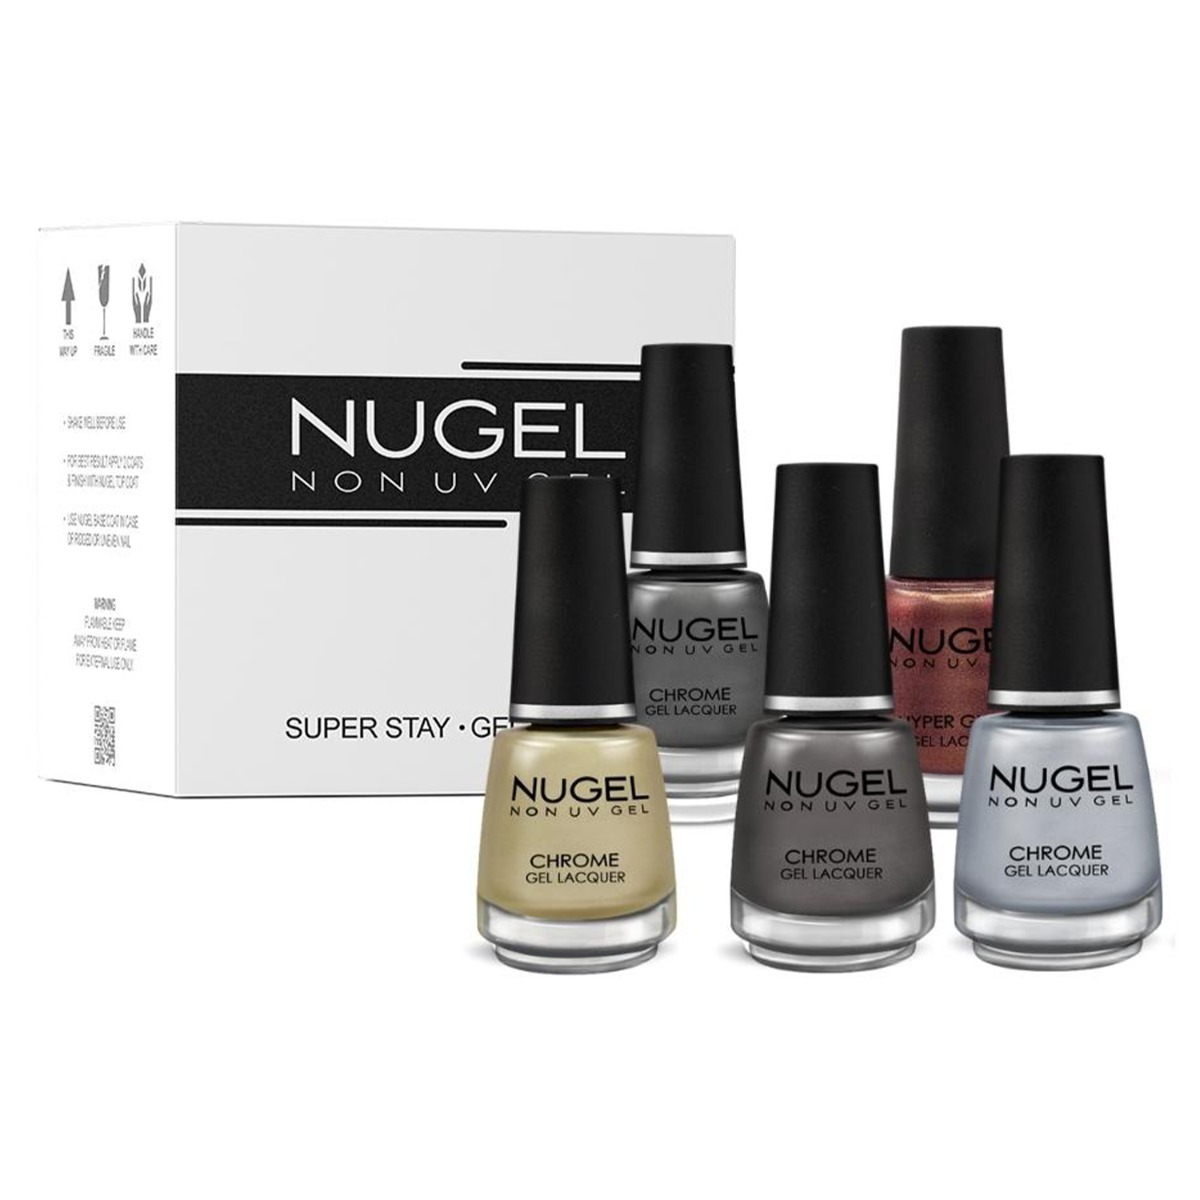 NUGEL 5 In 1 Combo 26 Quick Dry Gel Finish Nail Paint - Metal Collection, Nail Kit, 65ml